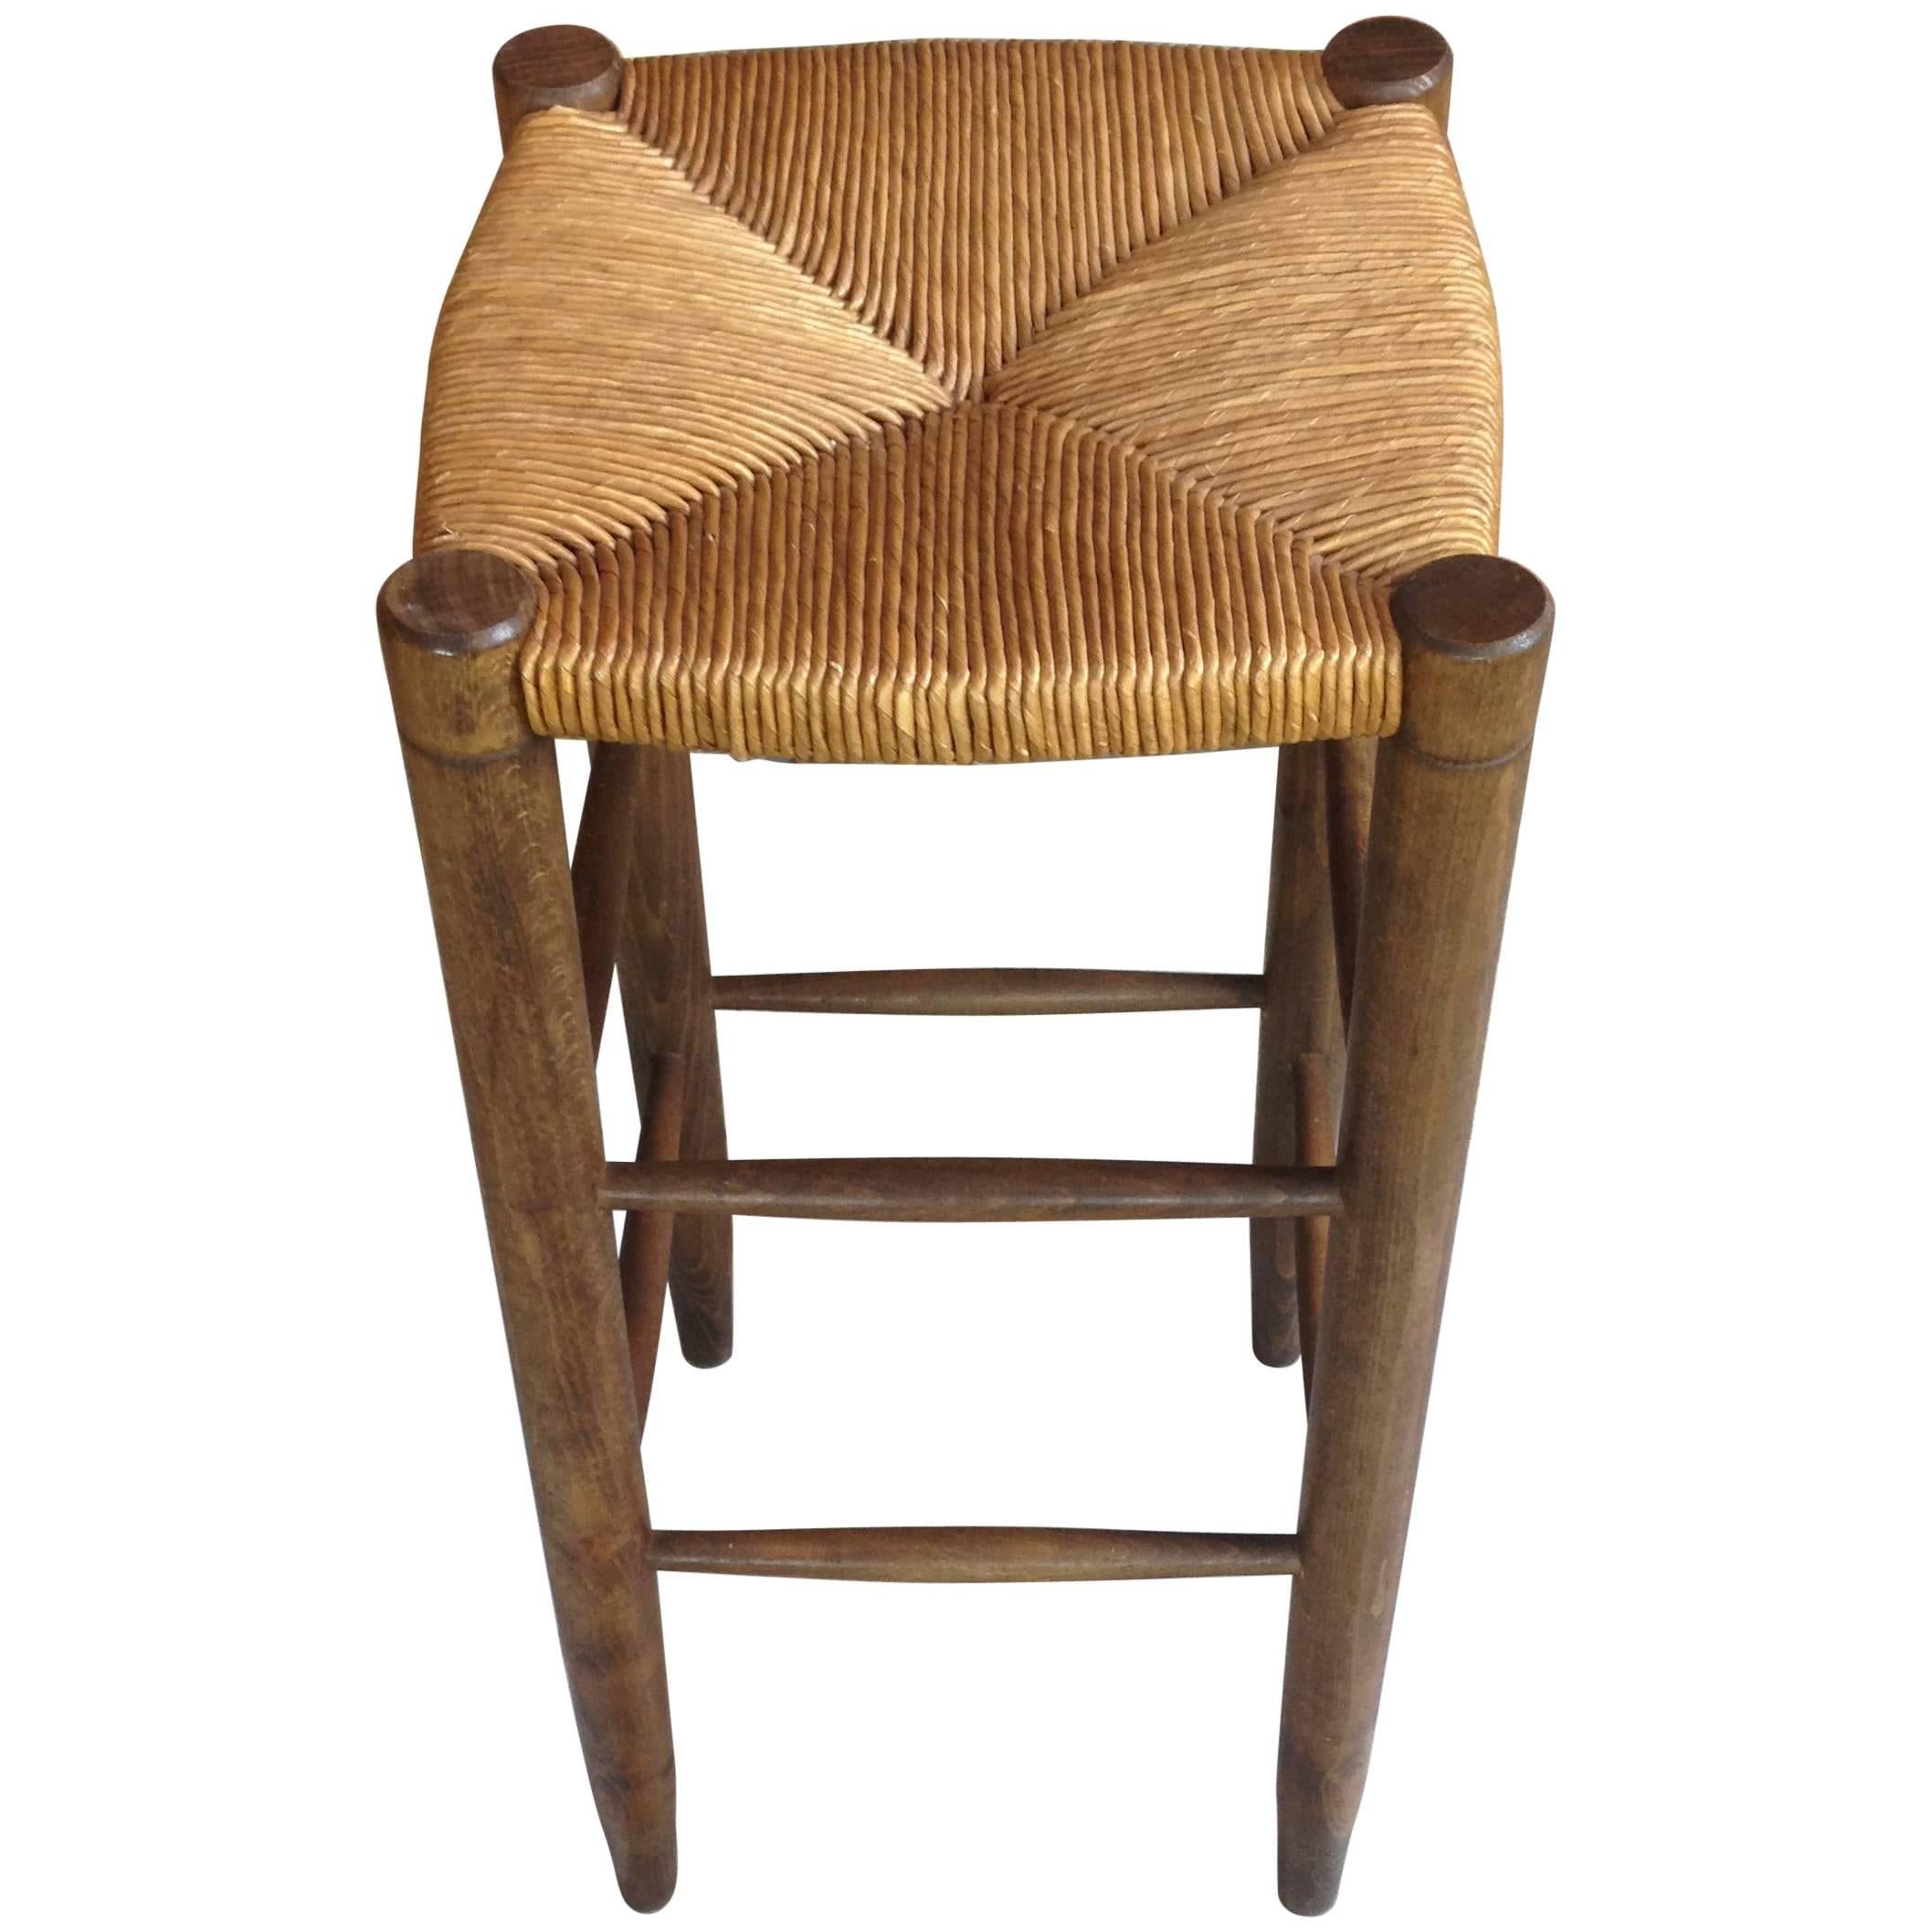 French Design of the 1950s Wooden High Stool